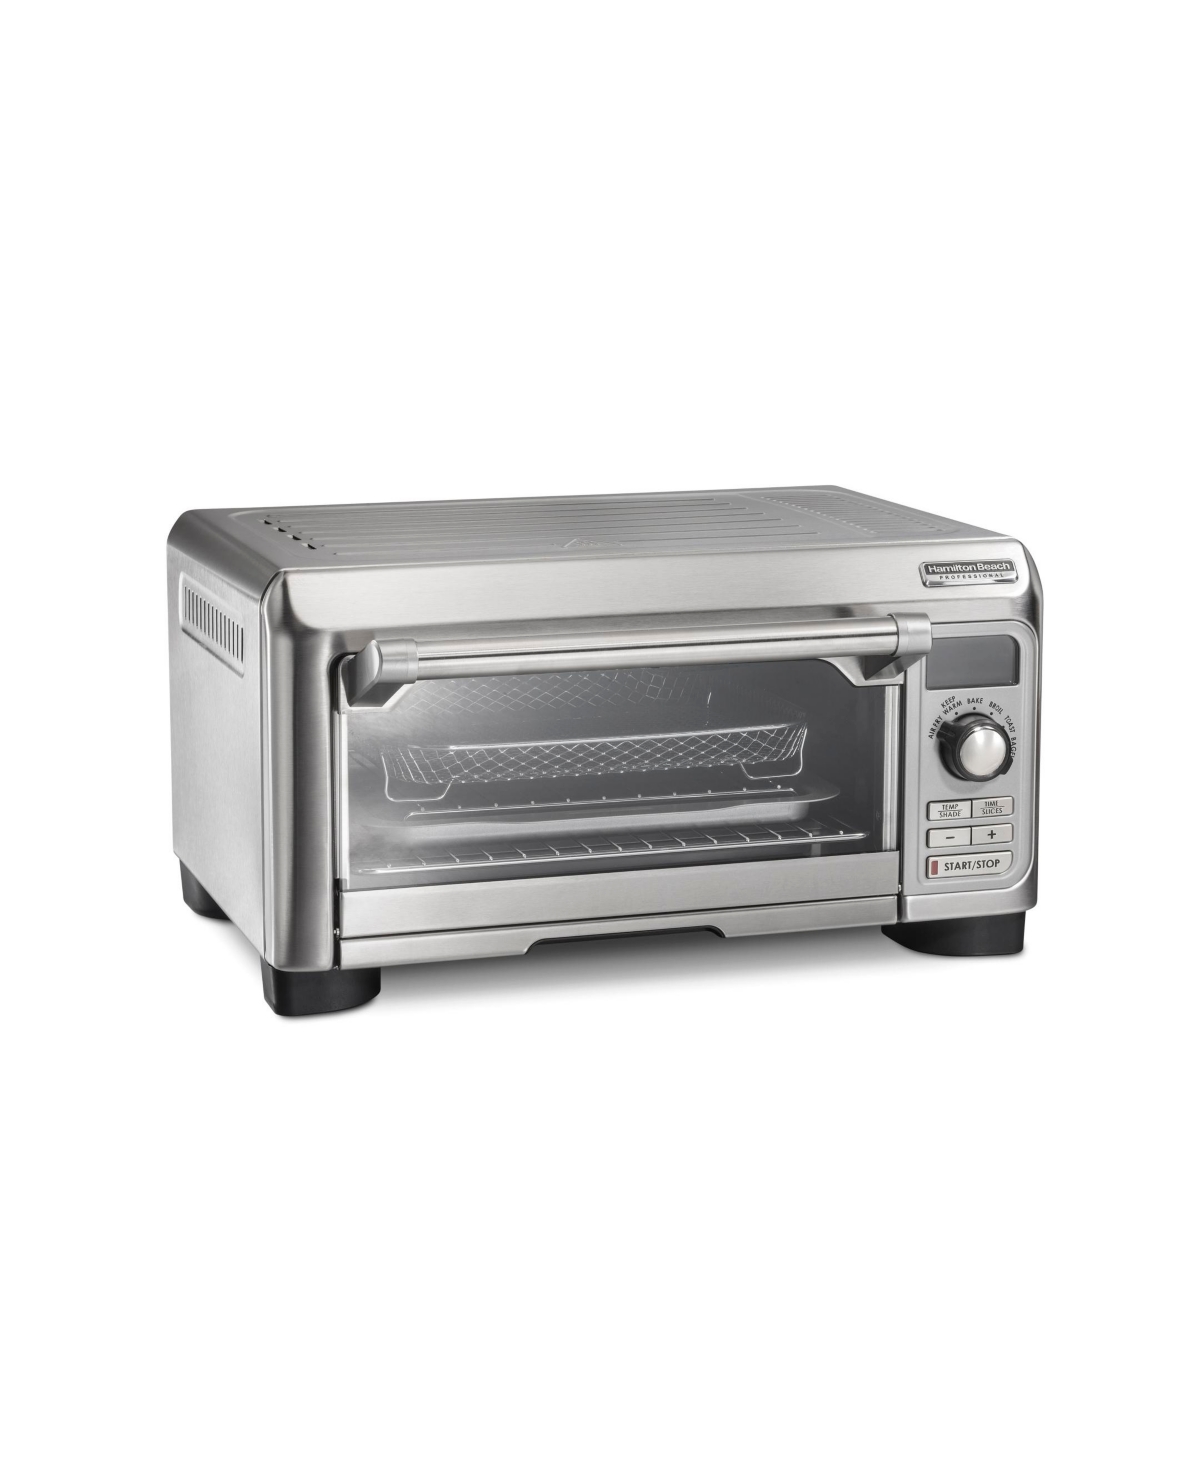 Hamilton Beach Professional Sure-crisp Air Fry Digital Toaster Oven In Stainless Steel